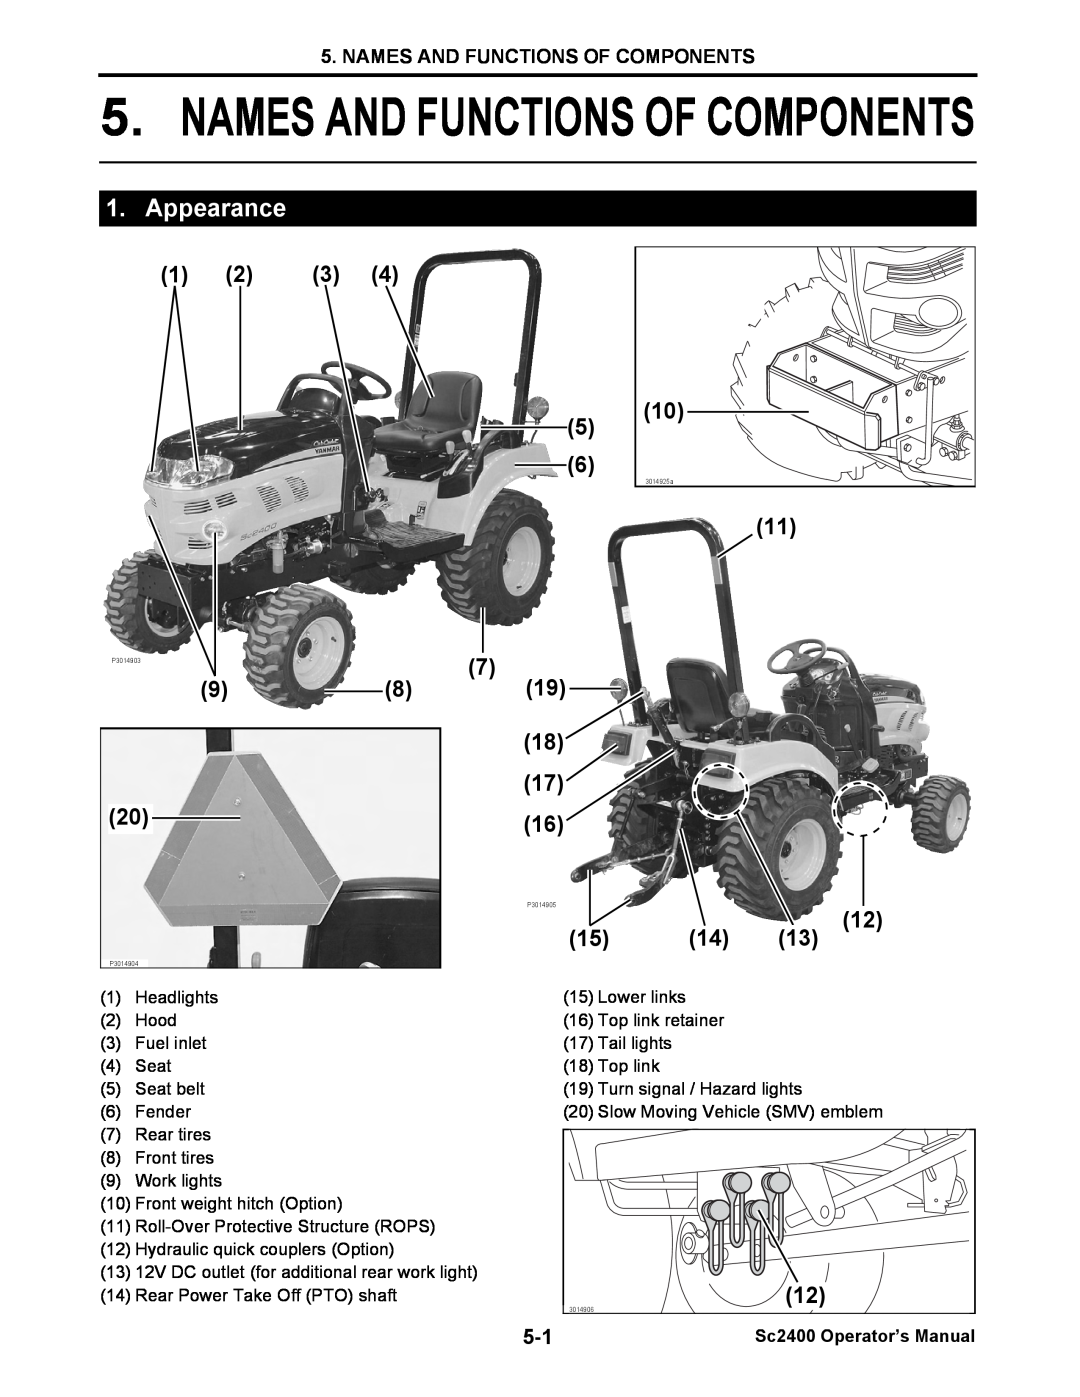 Cub Cadet SC2400 manual Appearance, 98 20, 19 18 17 16, Names And Functions Of Components 